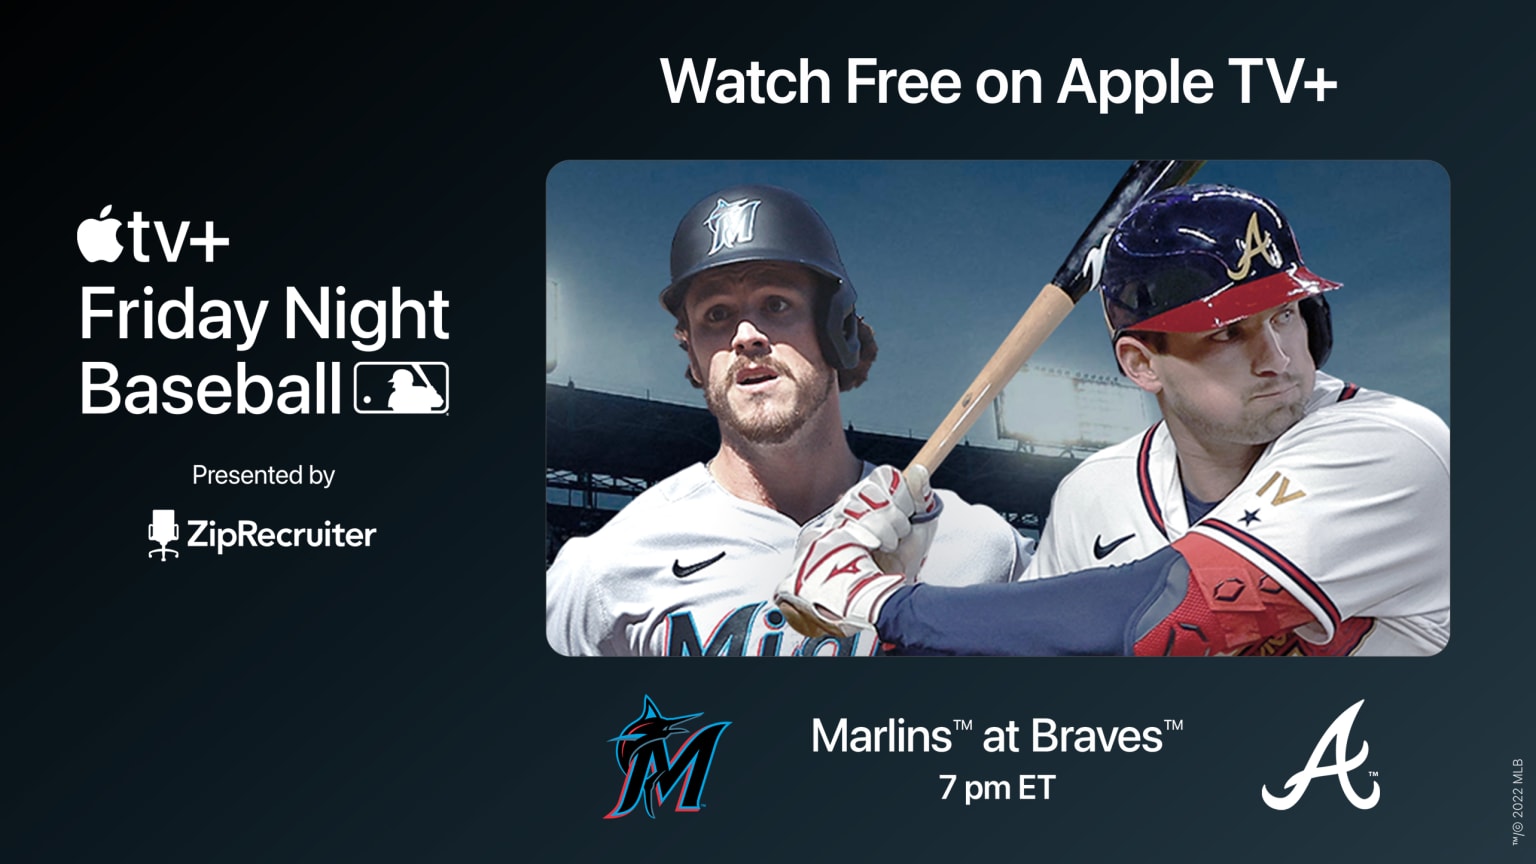 Marlins and Braves on Apple TV+